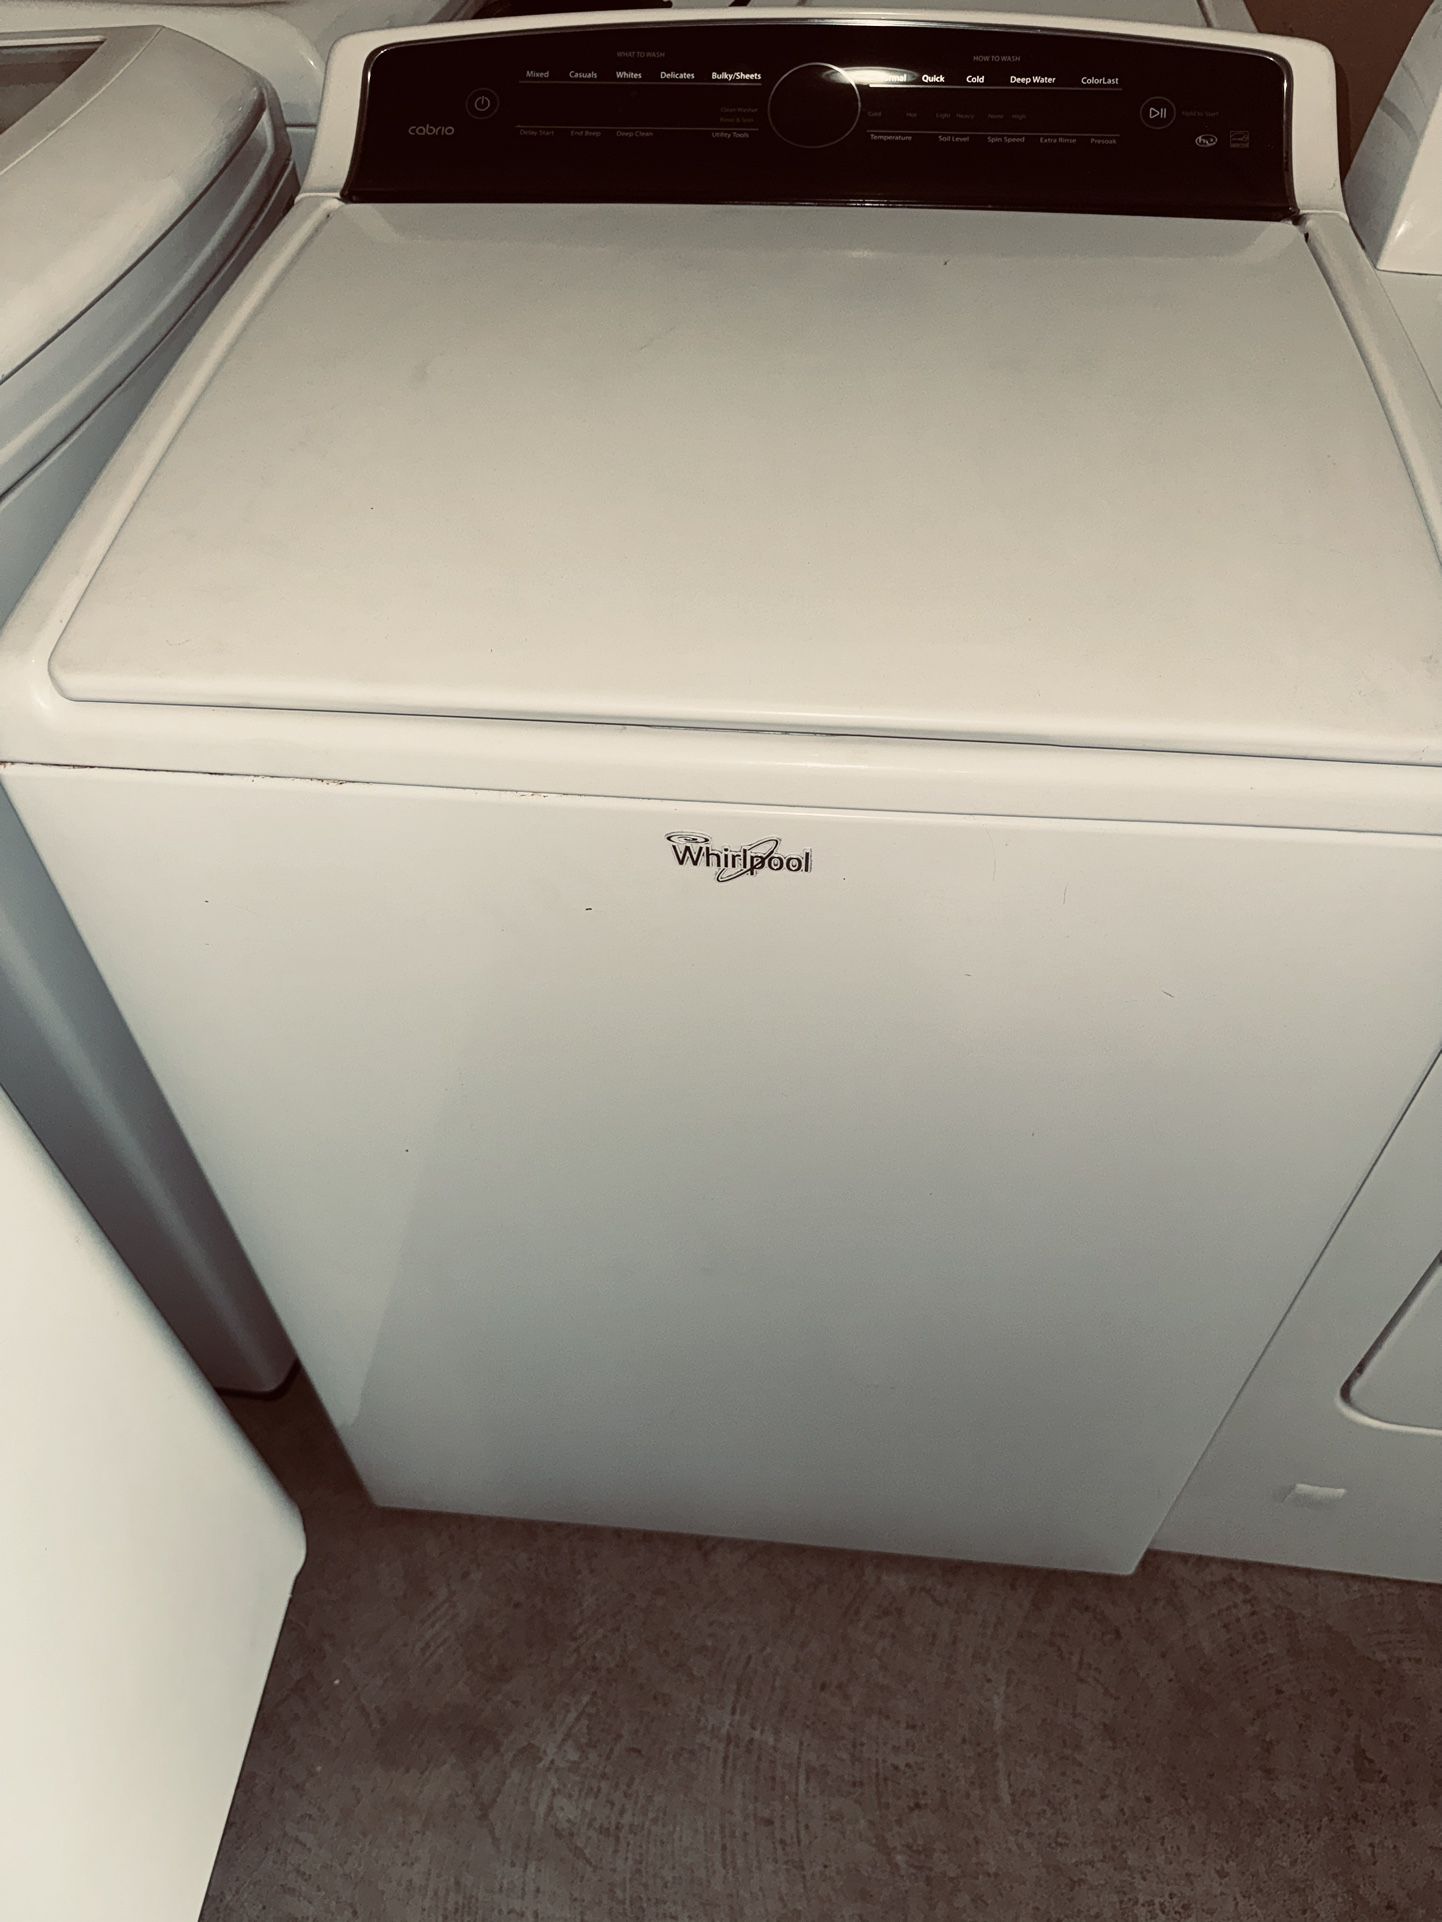 Whirlpool Washer Works Perfec 3 Month Warranty We Deliver 